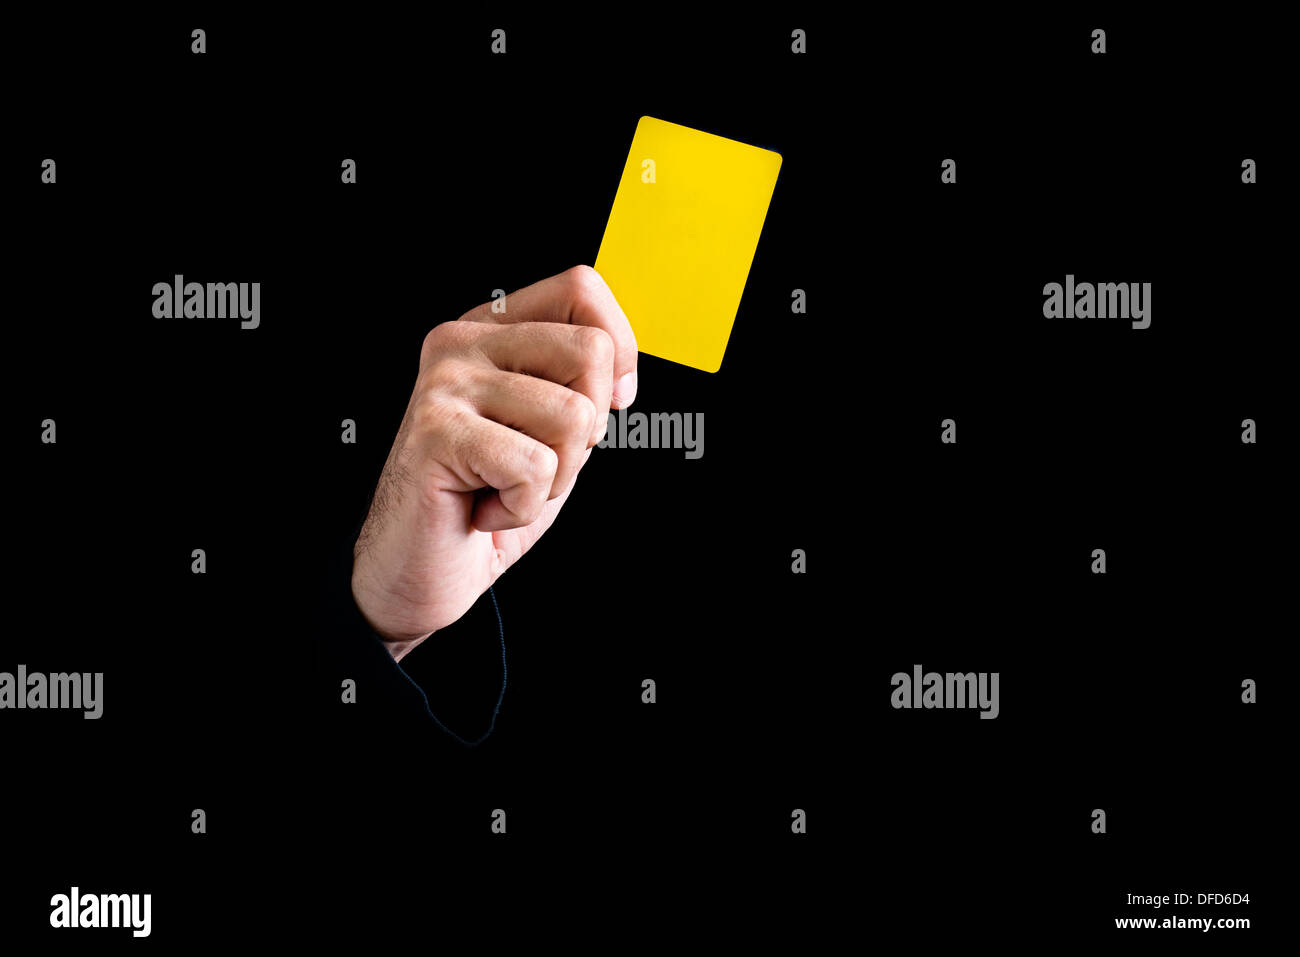 Soccer referee giving yellow card on black background. Stock Photo